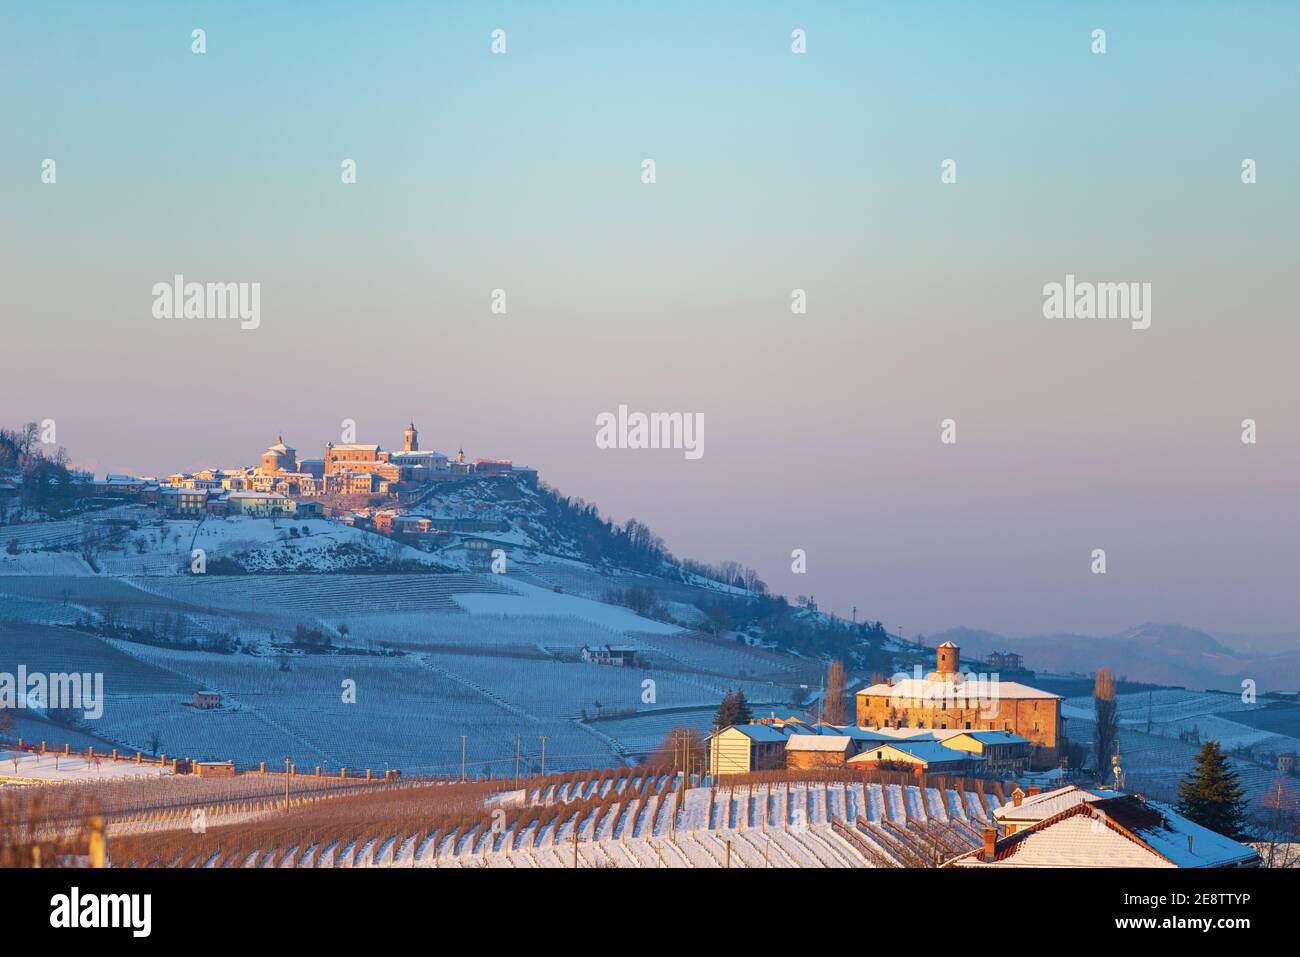 Italy Piedmont: wine yards unique landscape winter, La Morra village perched on hill top, sunset dramatic sky background, italian grapes heritage pano Stock Photo